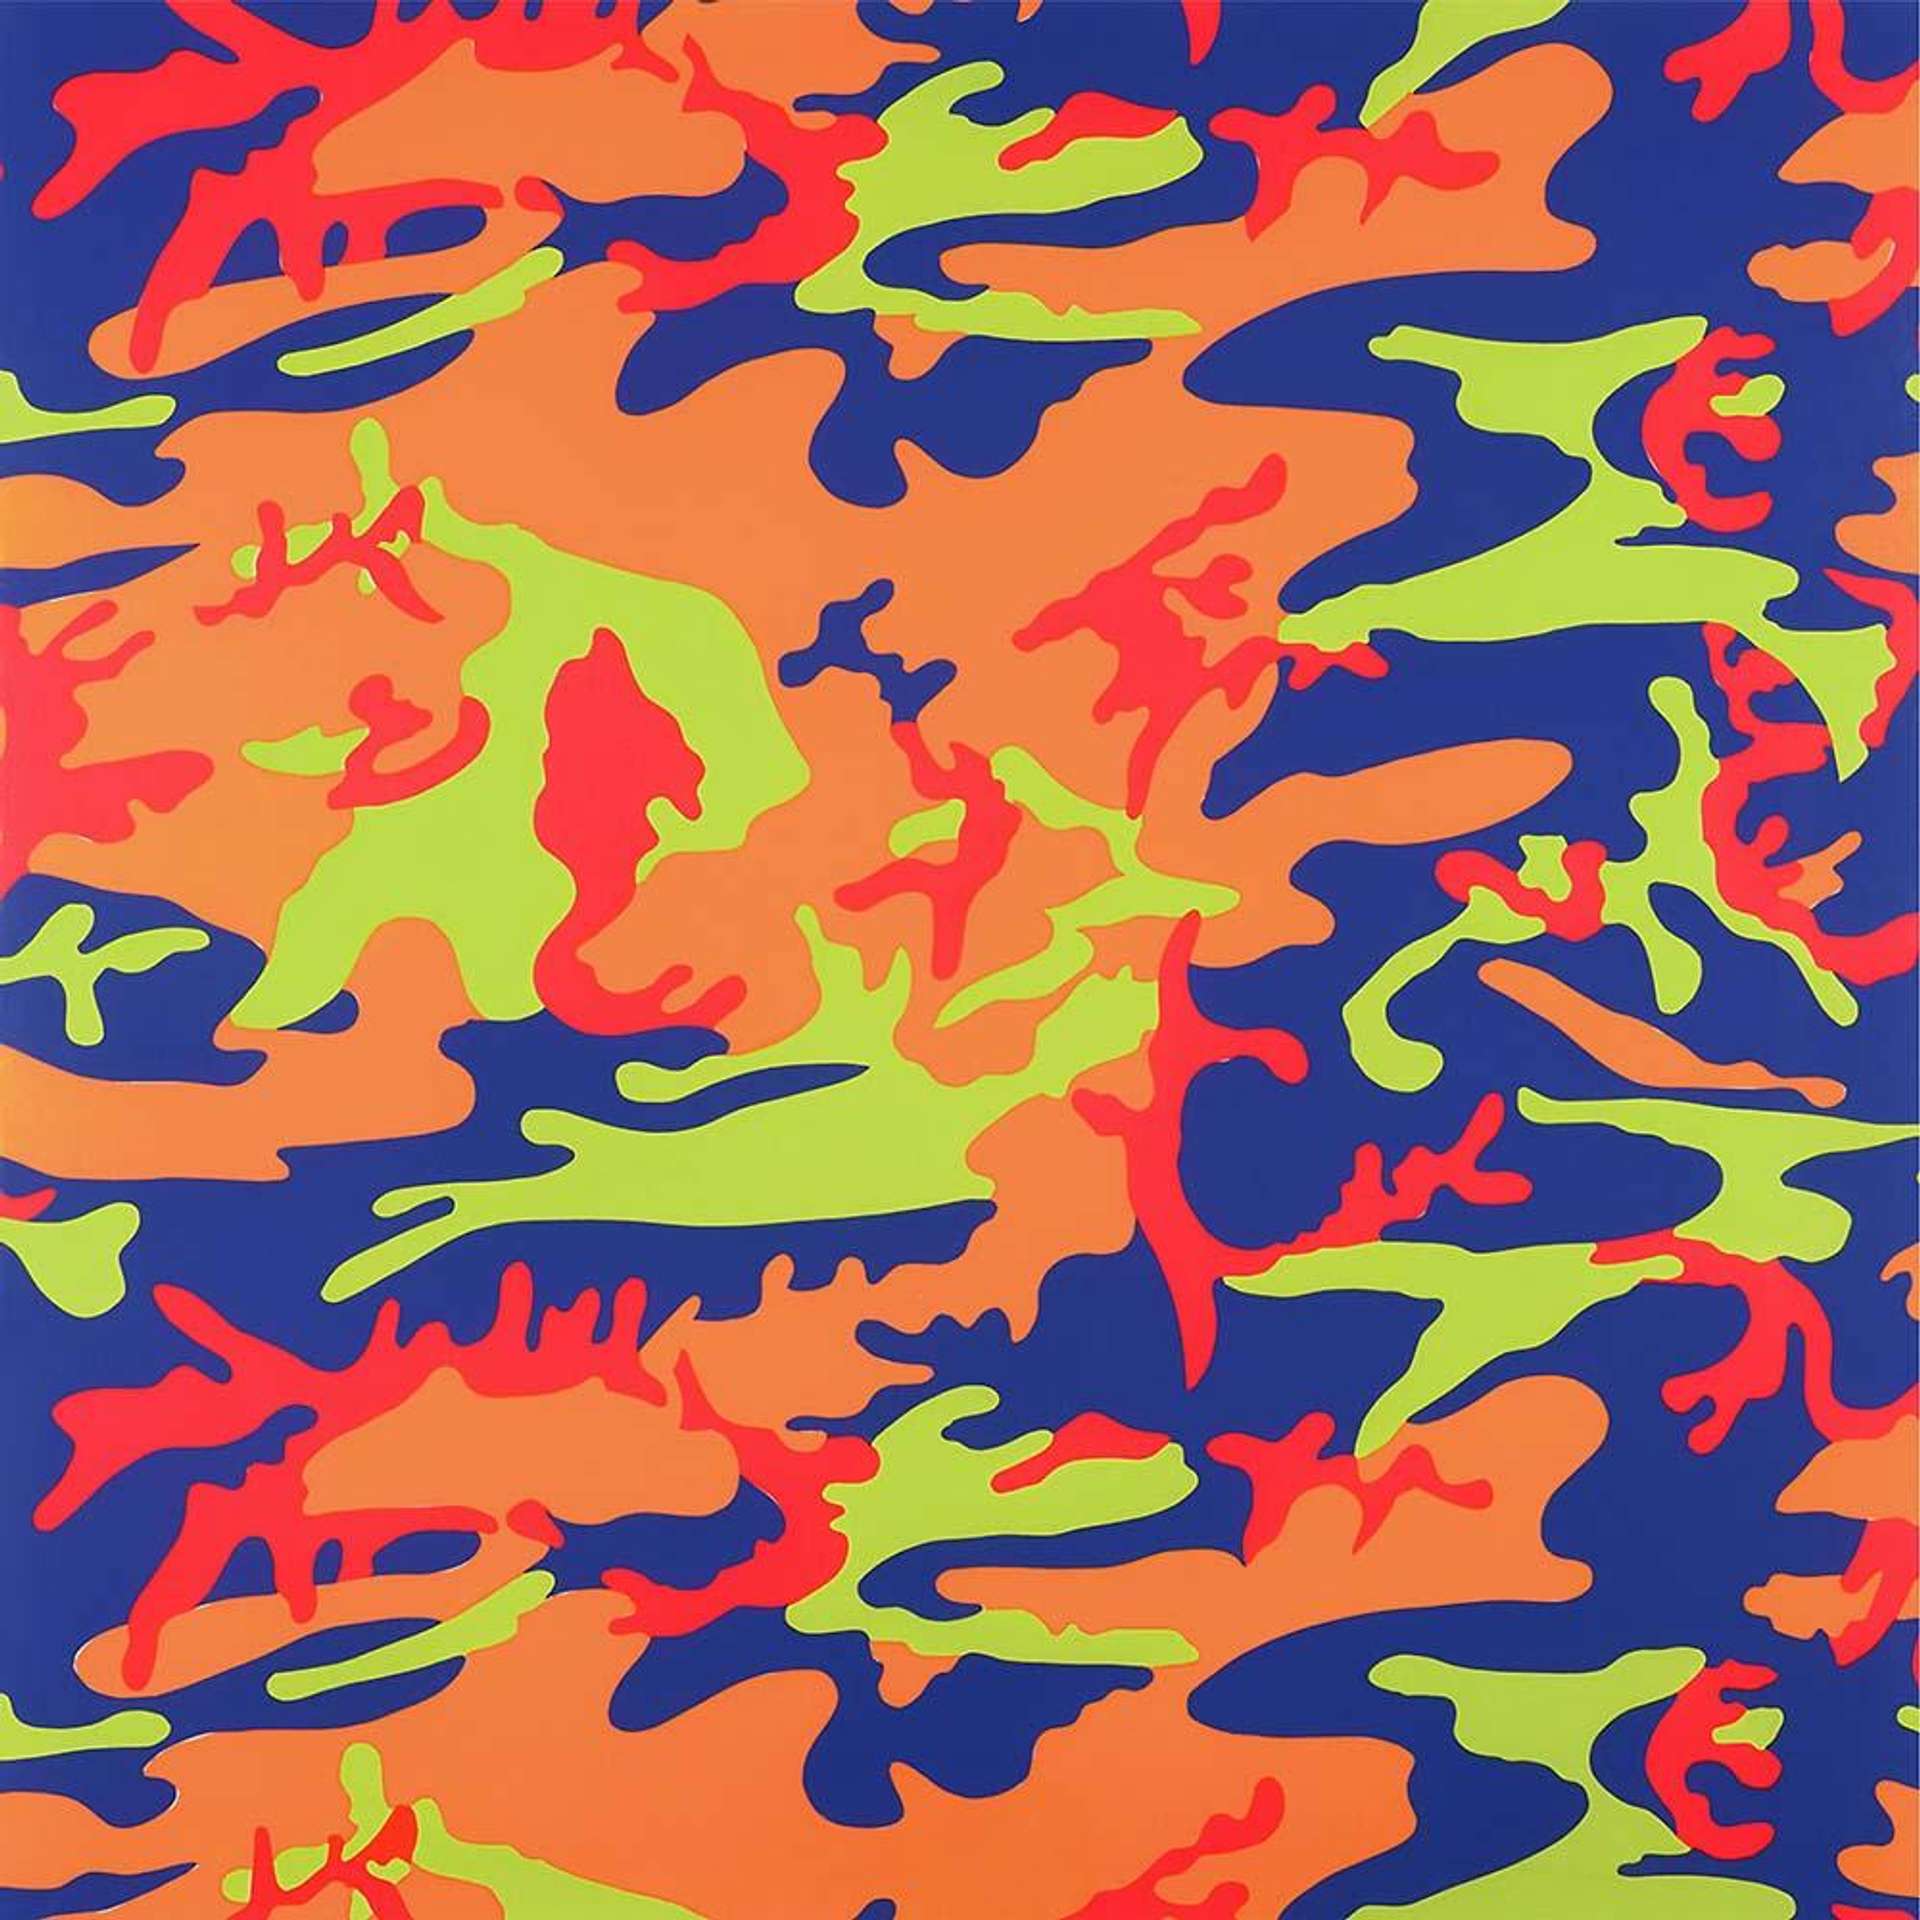 Camouflage (F. & S. II.412) by Andy Warhol